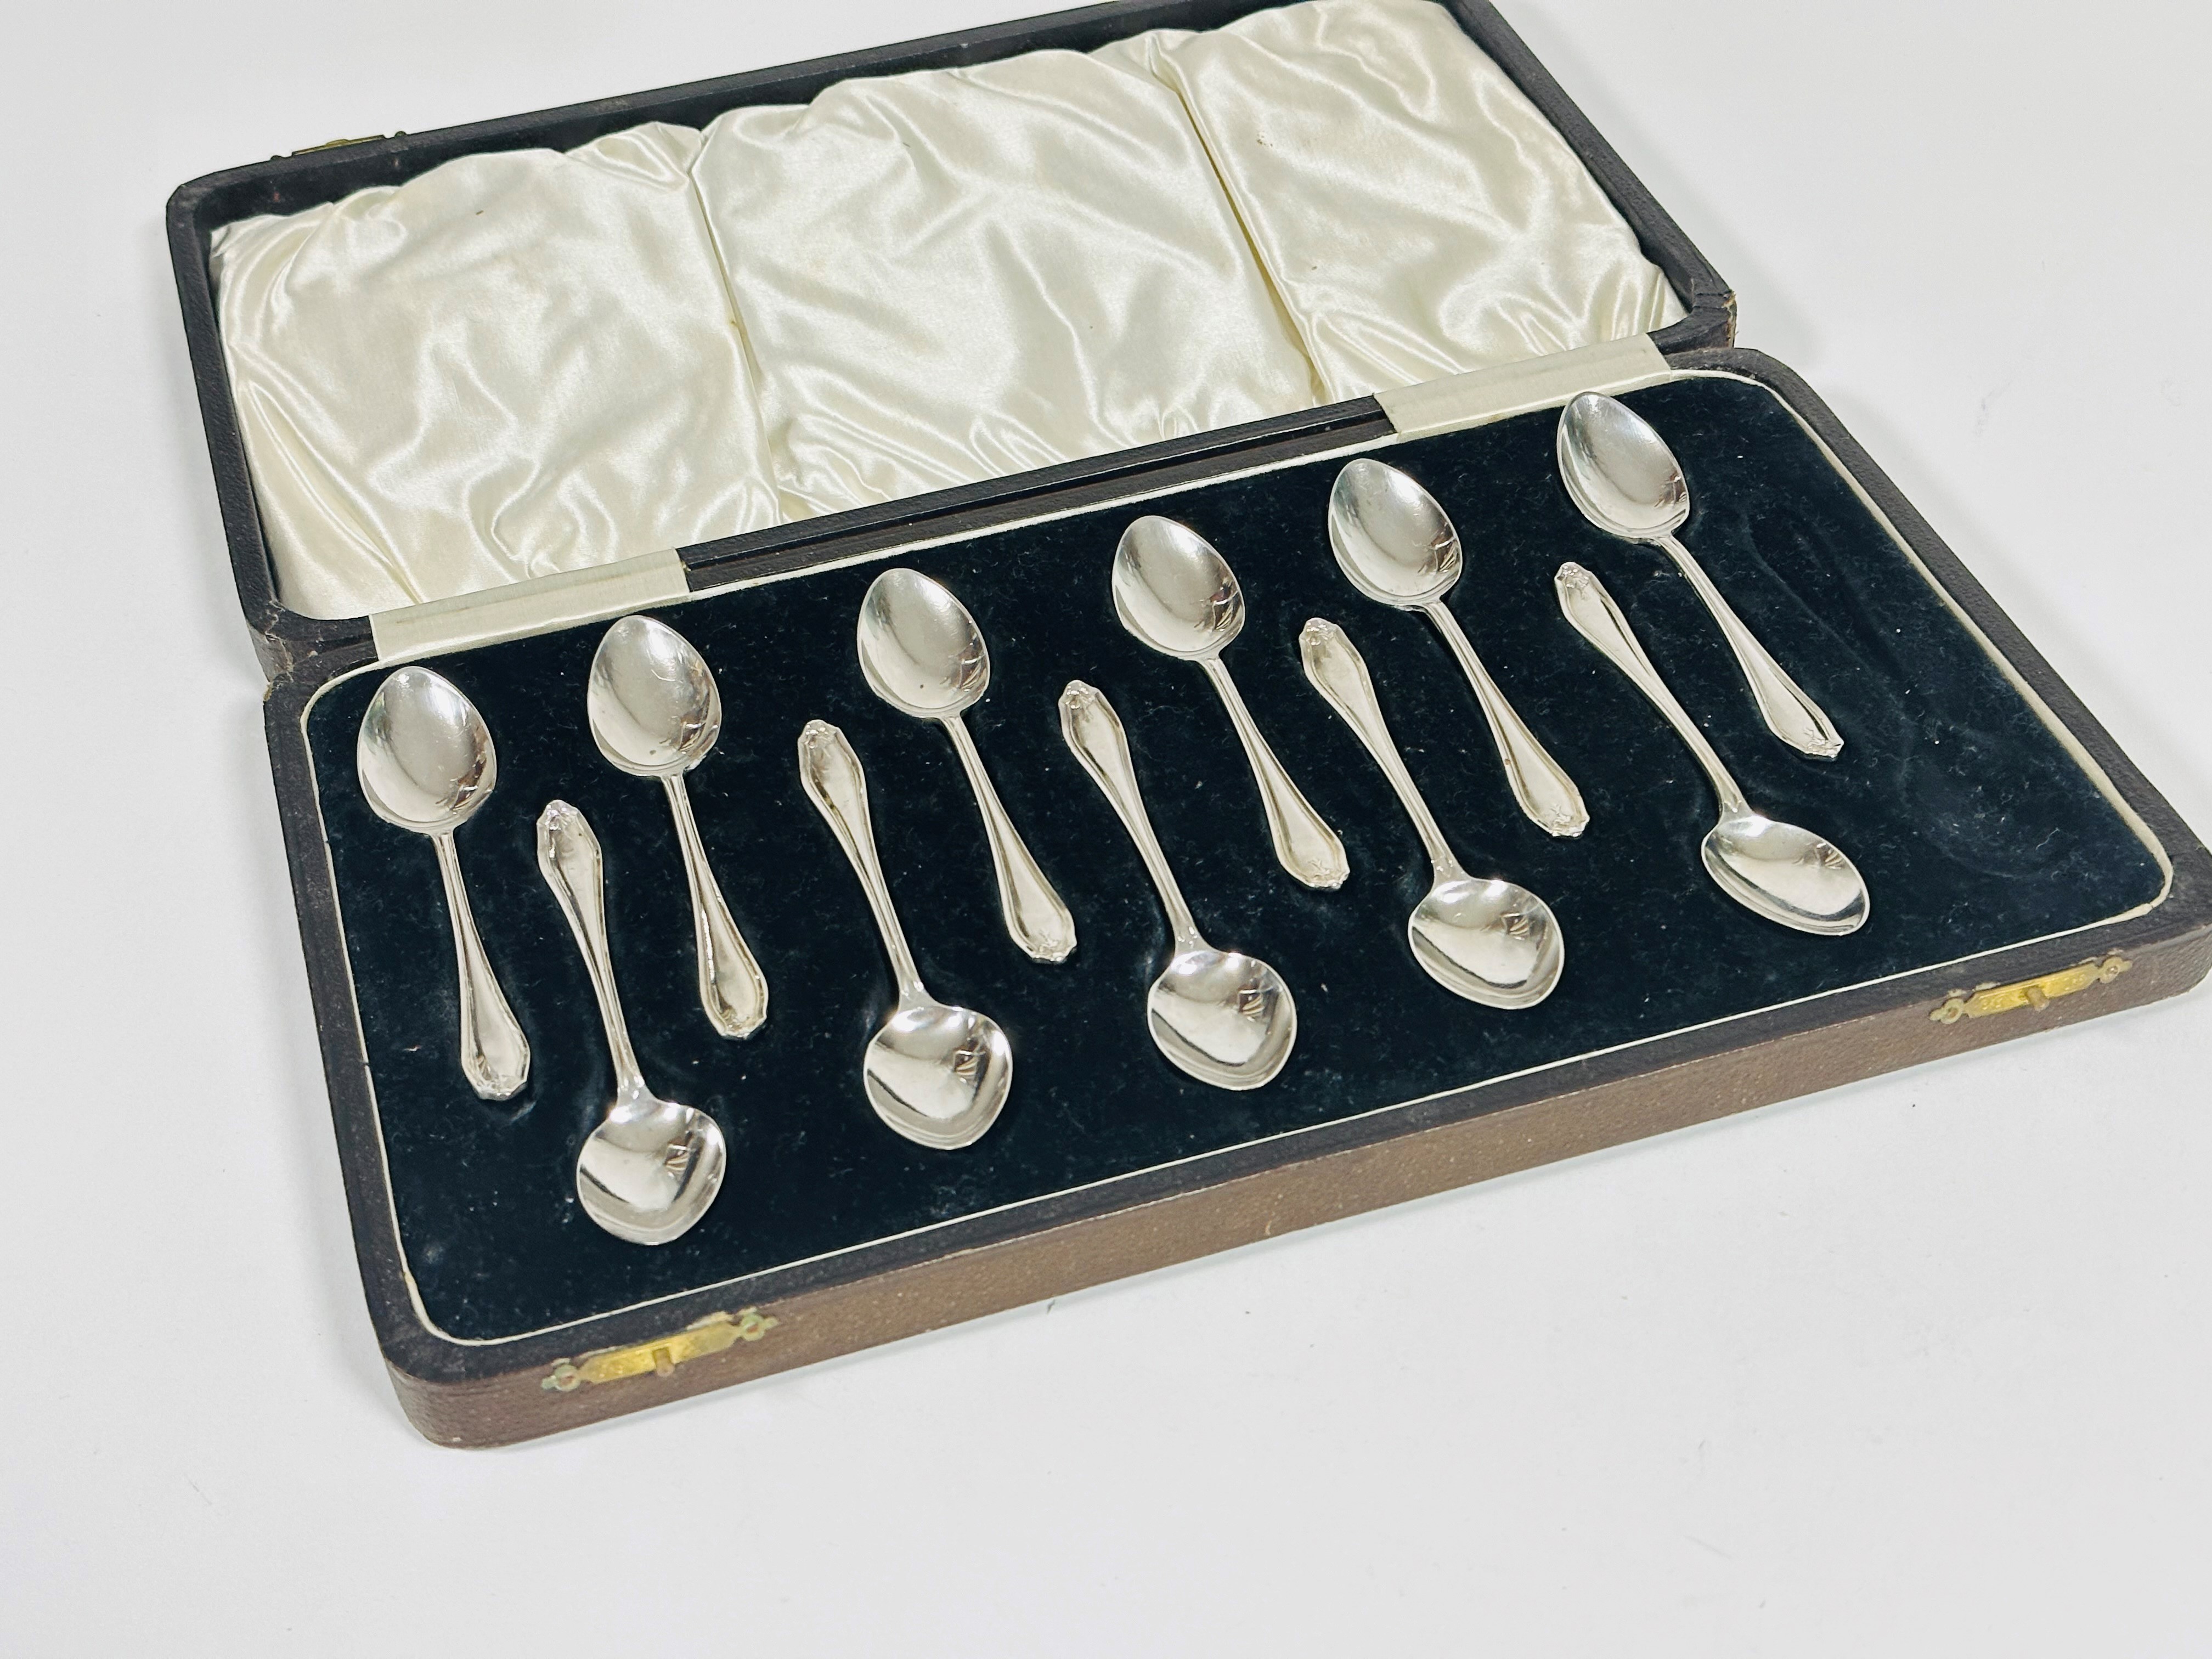 A set of eleven Sheffield silver tea spoons with hair bell cast handles, complete with fitted